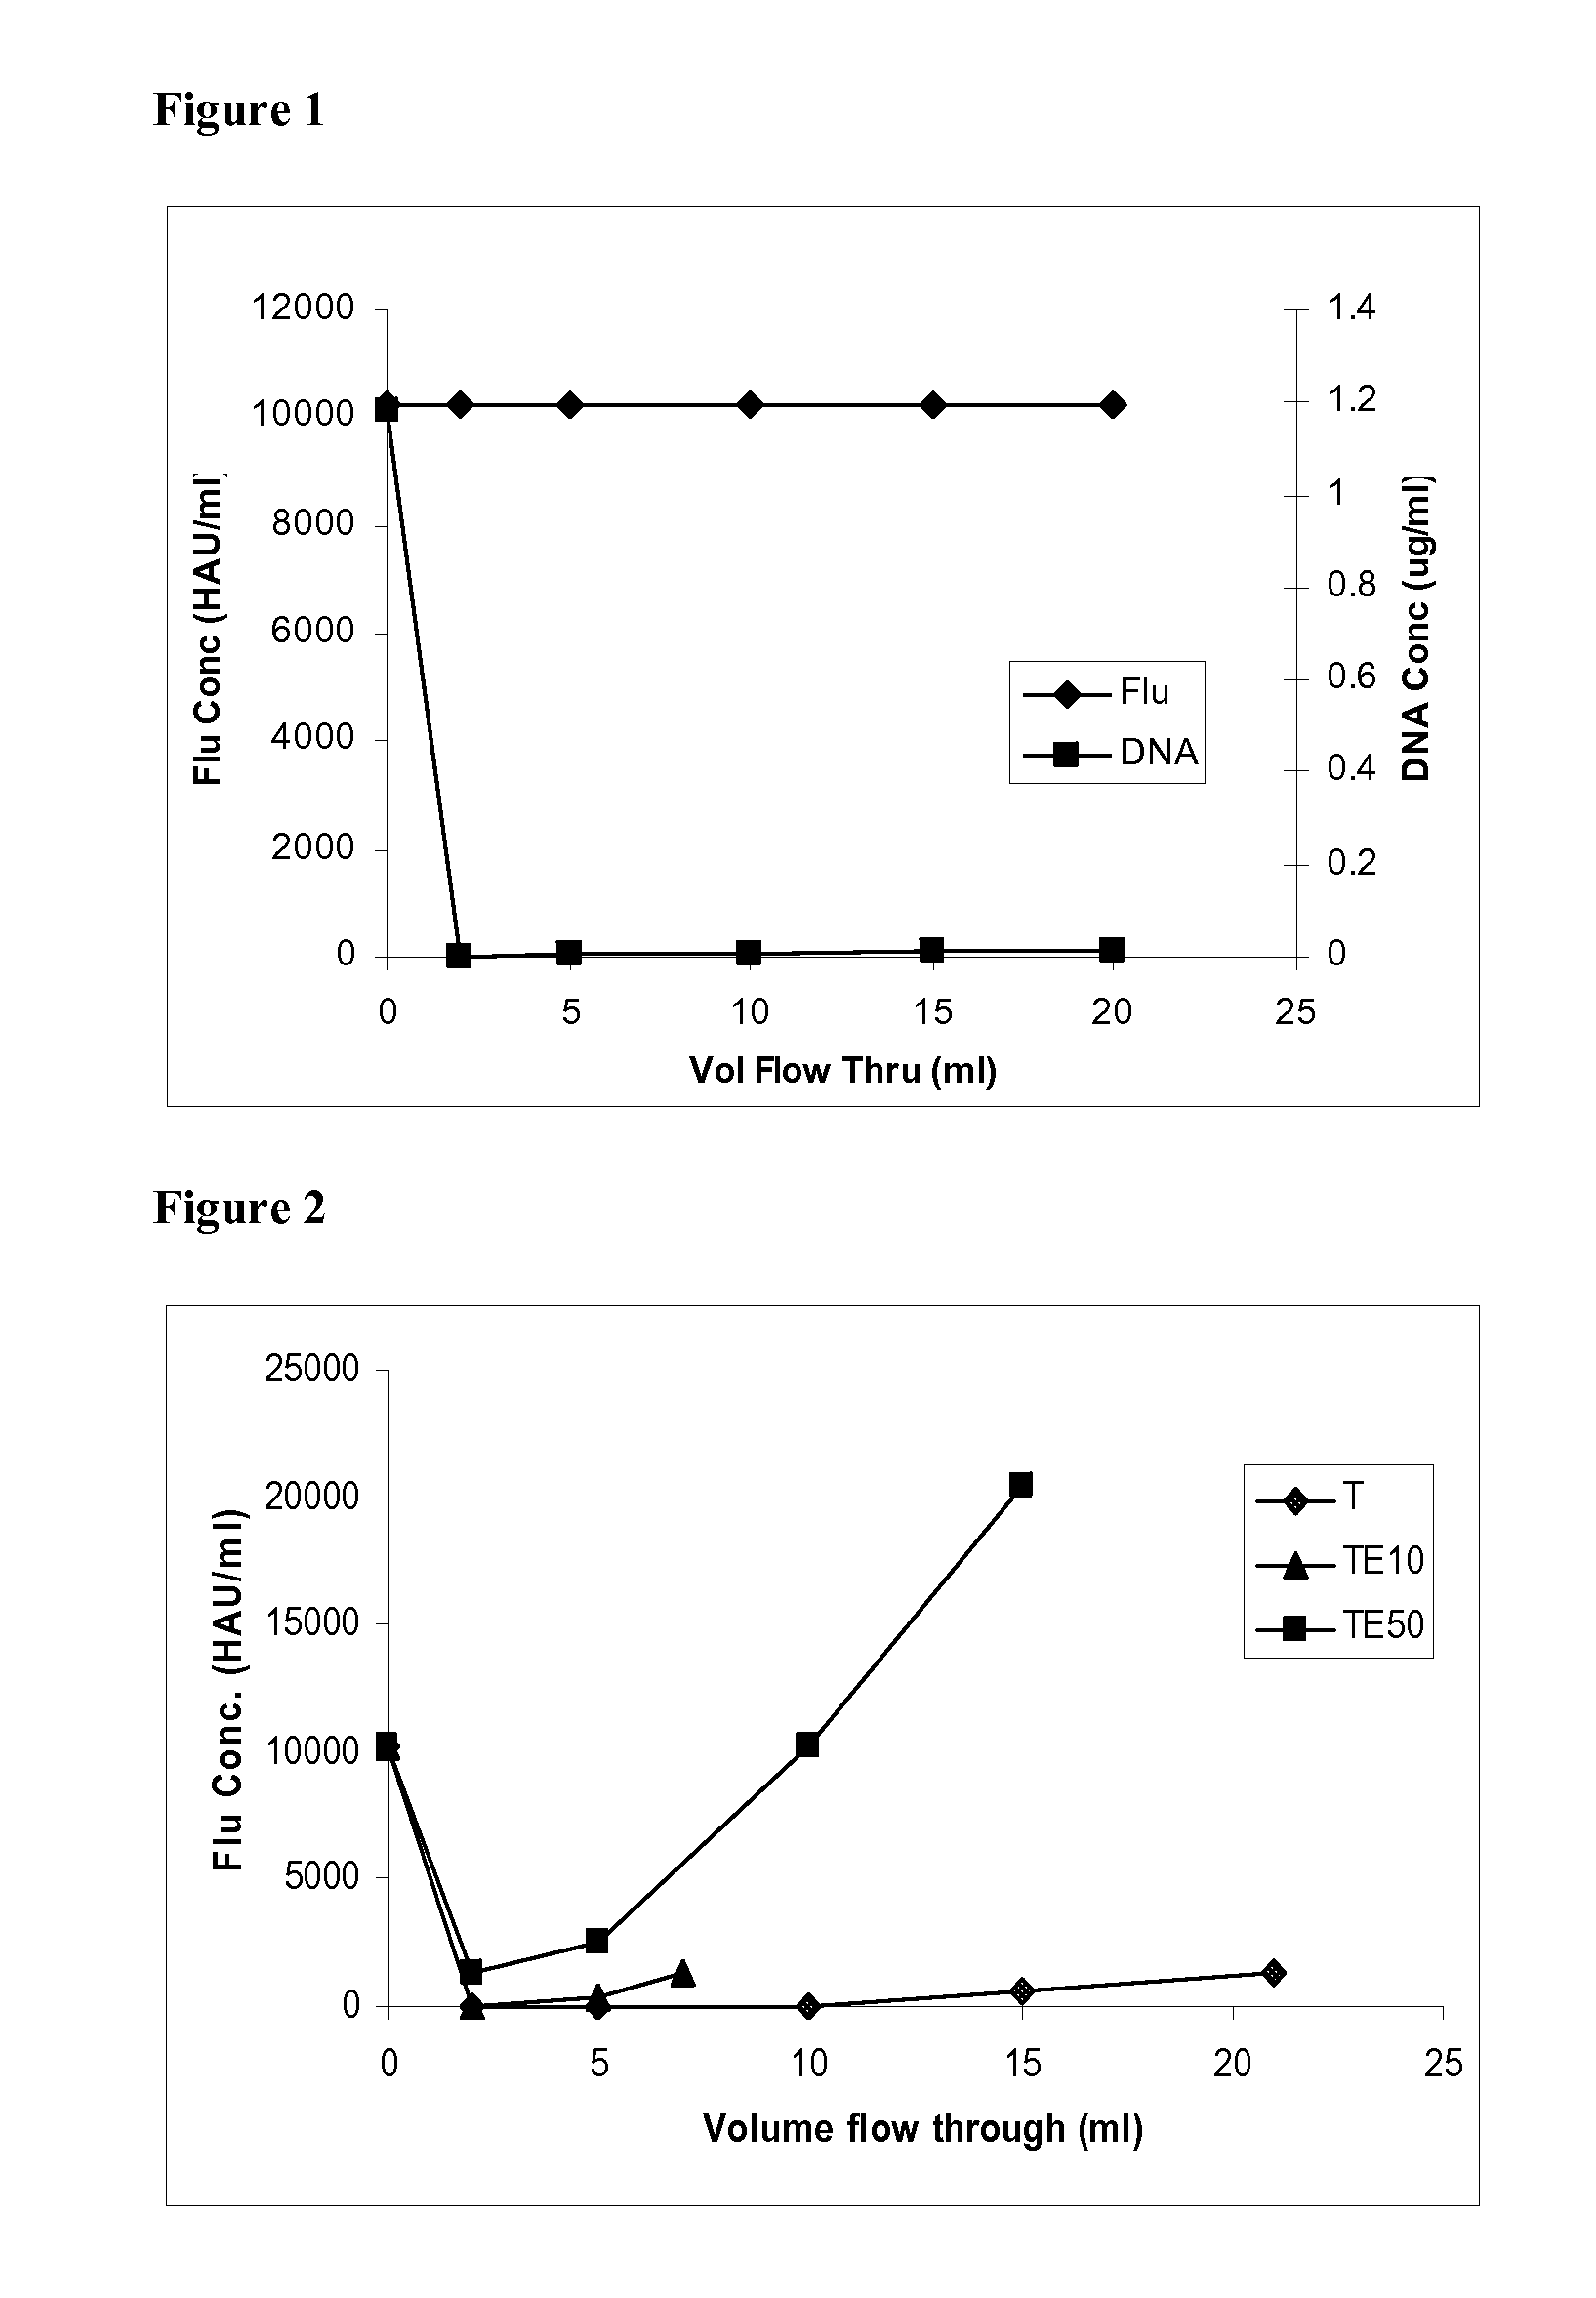 Separation Of Virus And/Or Protein From Nucleic Acids By Primary Amines